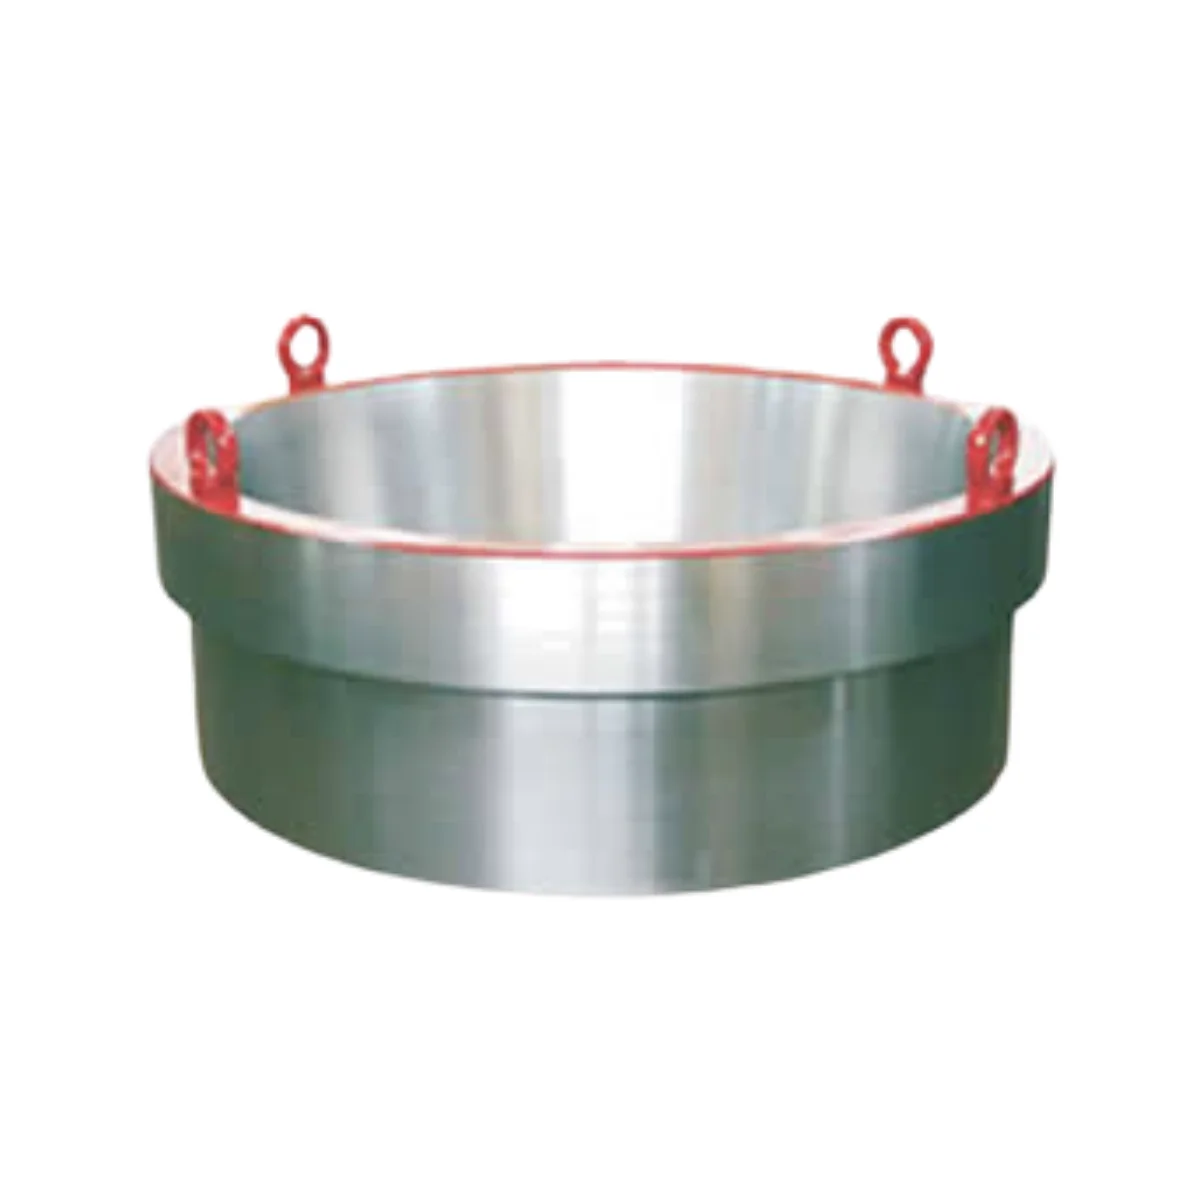 Round Casing Bushings for oilfield handling tools, including equivalents from NOV, Varco, DenCon, Forum, Bvm, Bv, and Rutong. These bushings are designed to accommodate round casing, providing stability and support during drilling operations. Options are available for both standard and 37.5-inch sizes, as well as specific rotary table models. These components are essential for ensuring efficient and effective drilling in the oilfield.